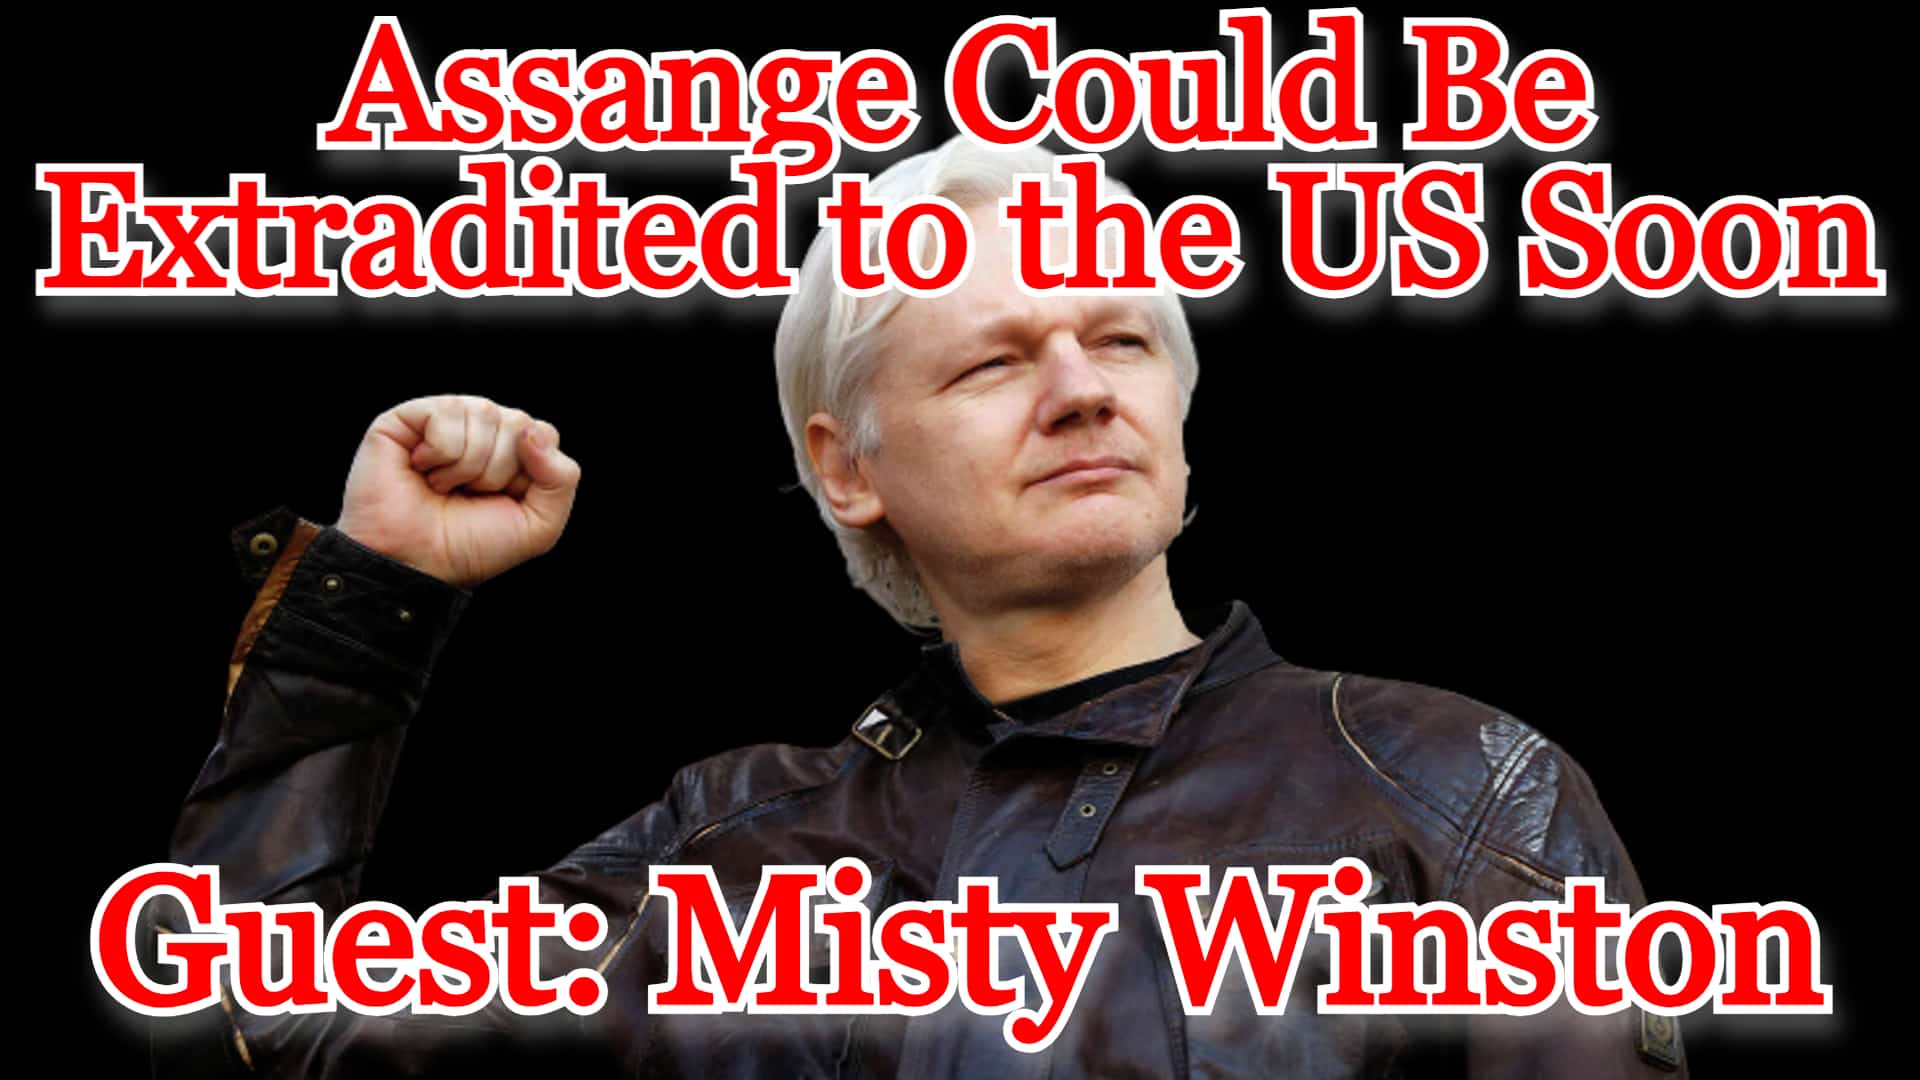 COI #437: Assange Could Be Extradited to the US Soon